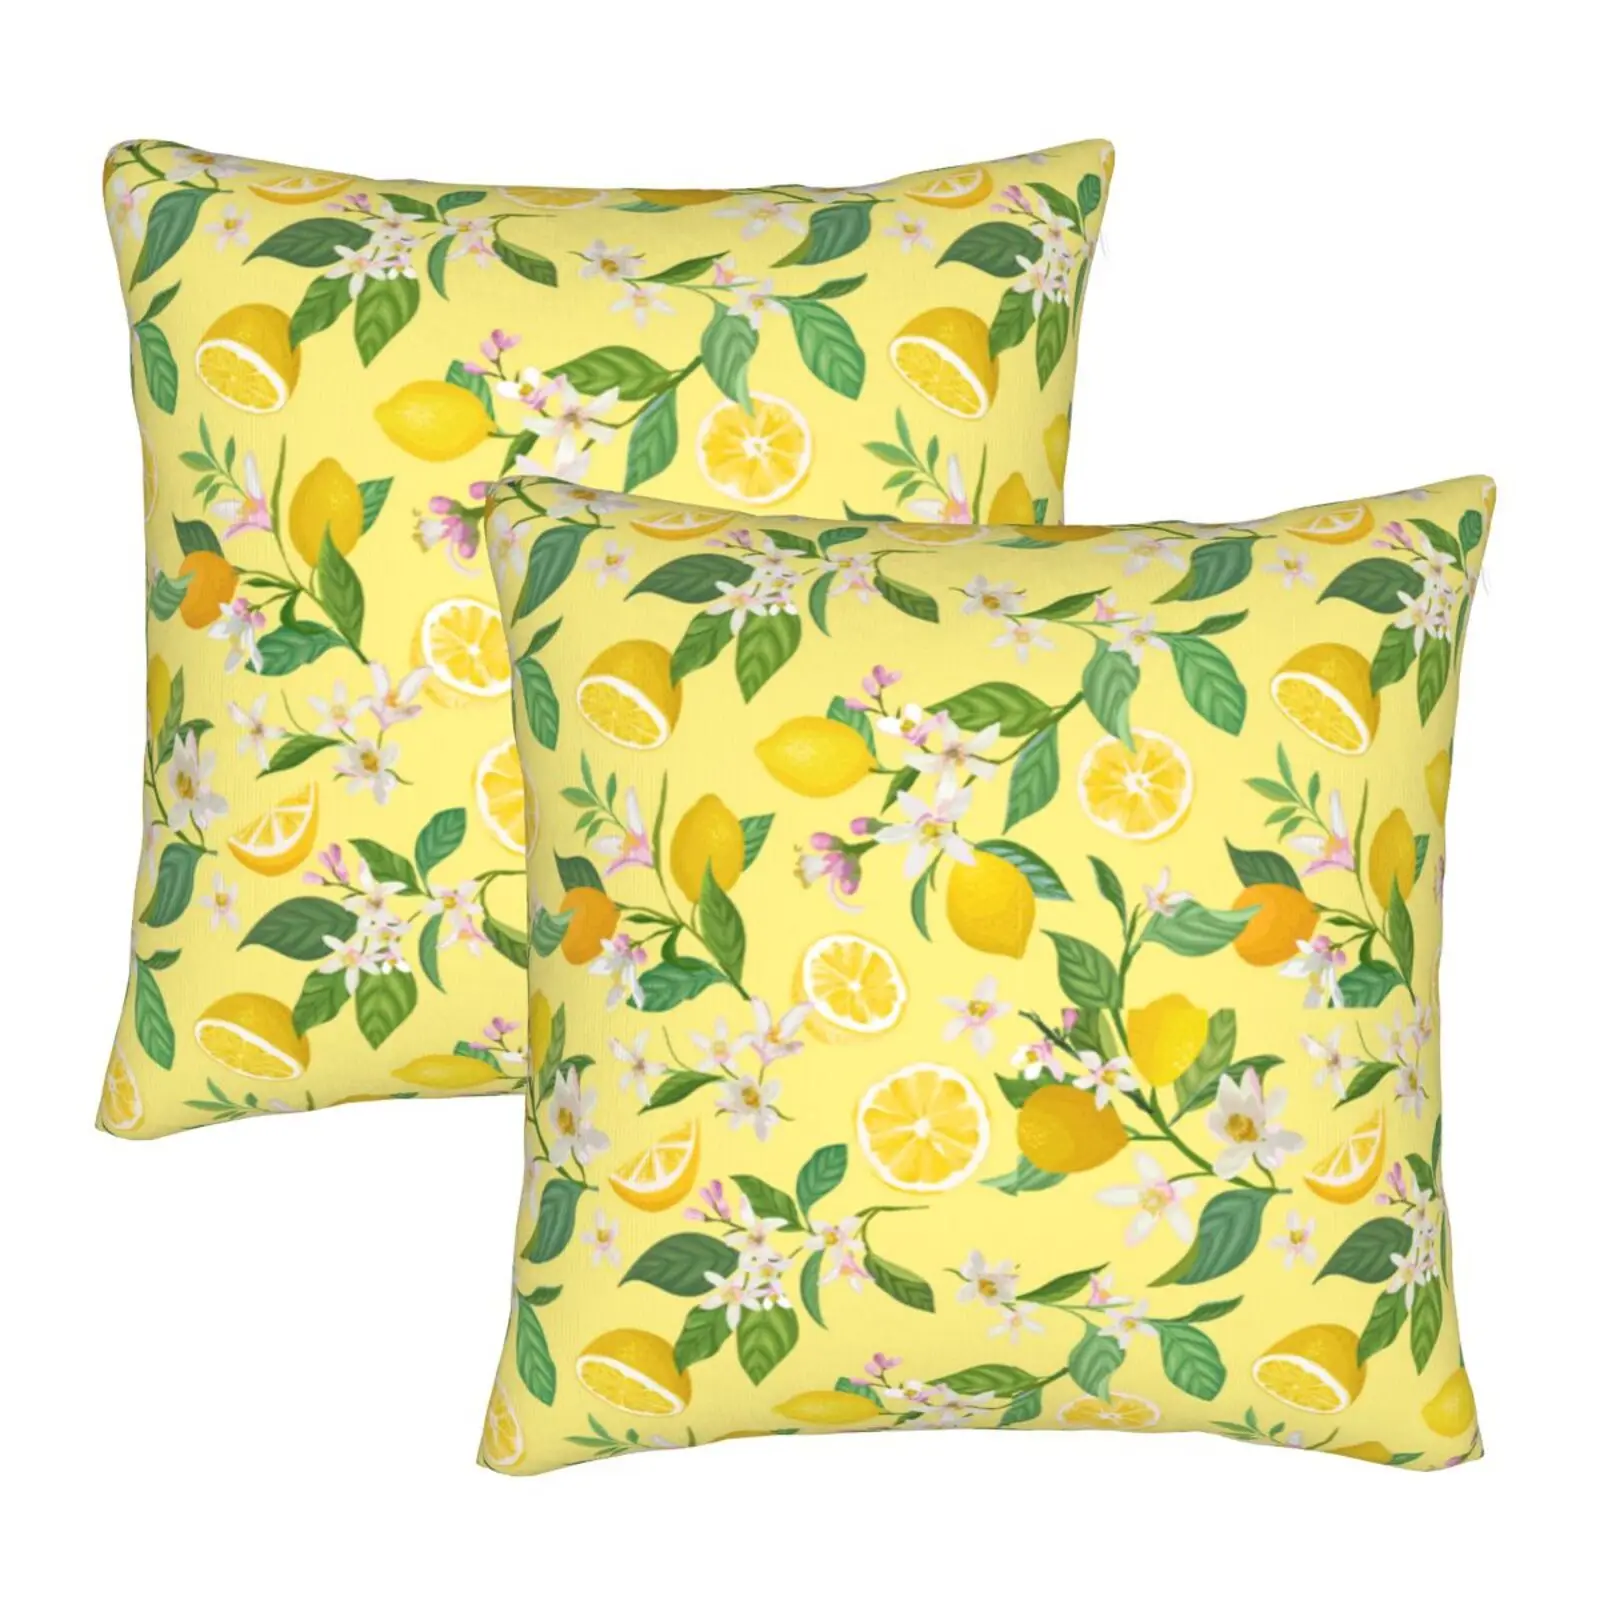 

Yellow Lemon Flower Winter Double Sided Plush Hidden Zipper Square Pillow Bed Sofa Living Room Car Office 18X18 Inch Thickening